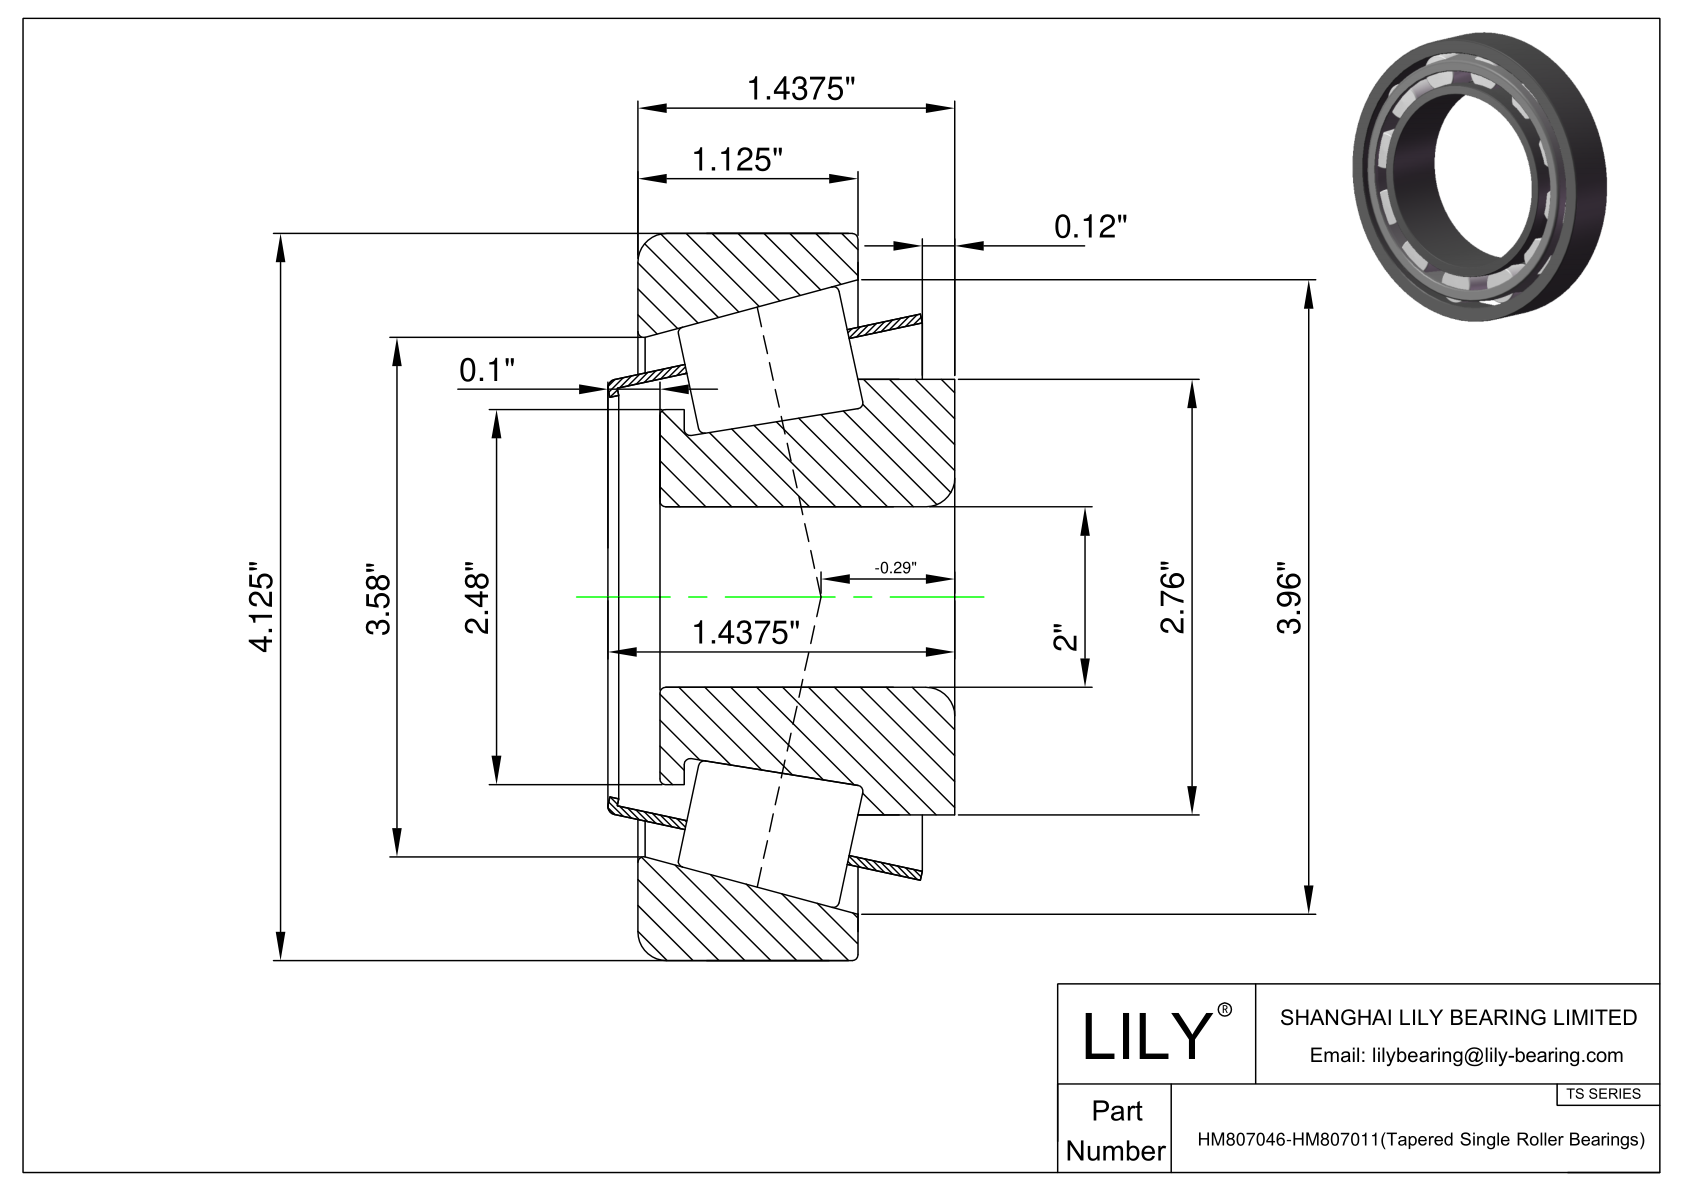 HM807046-HM807011 TS (Tapered Single Roller Bearings) (Imperial) cad drawing